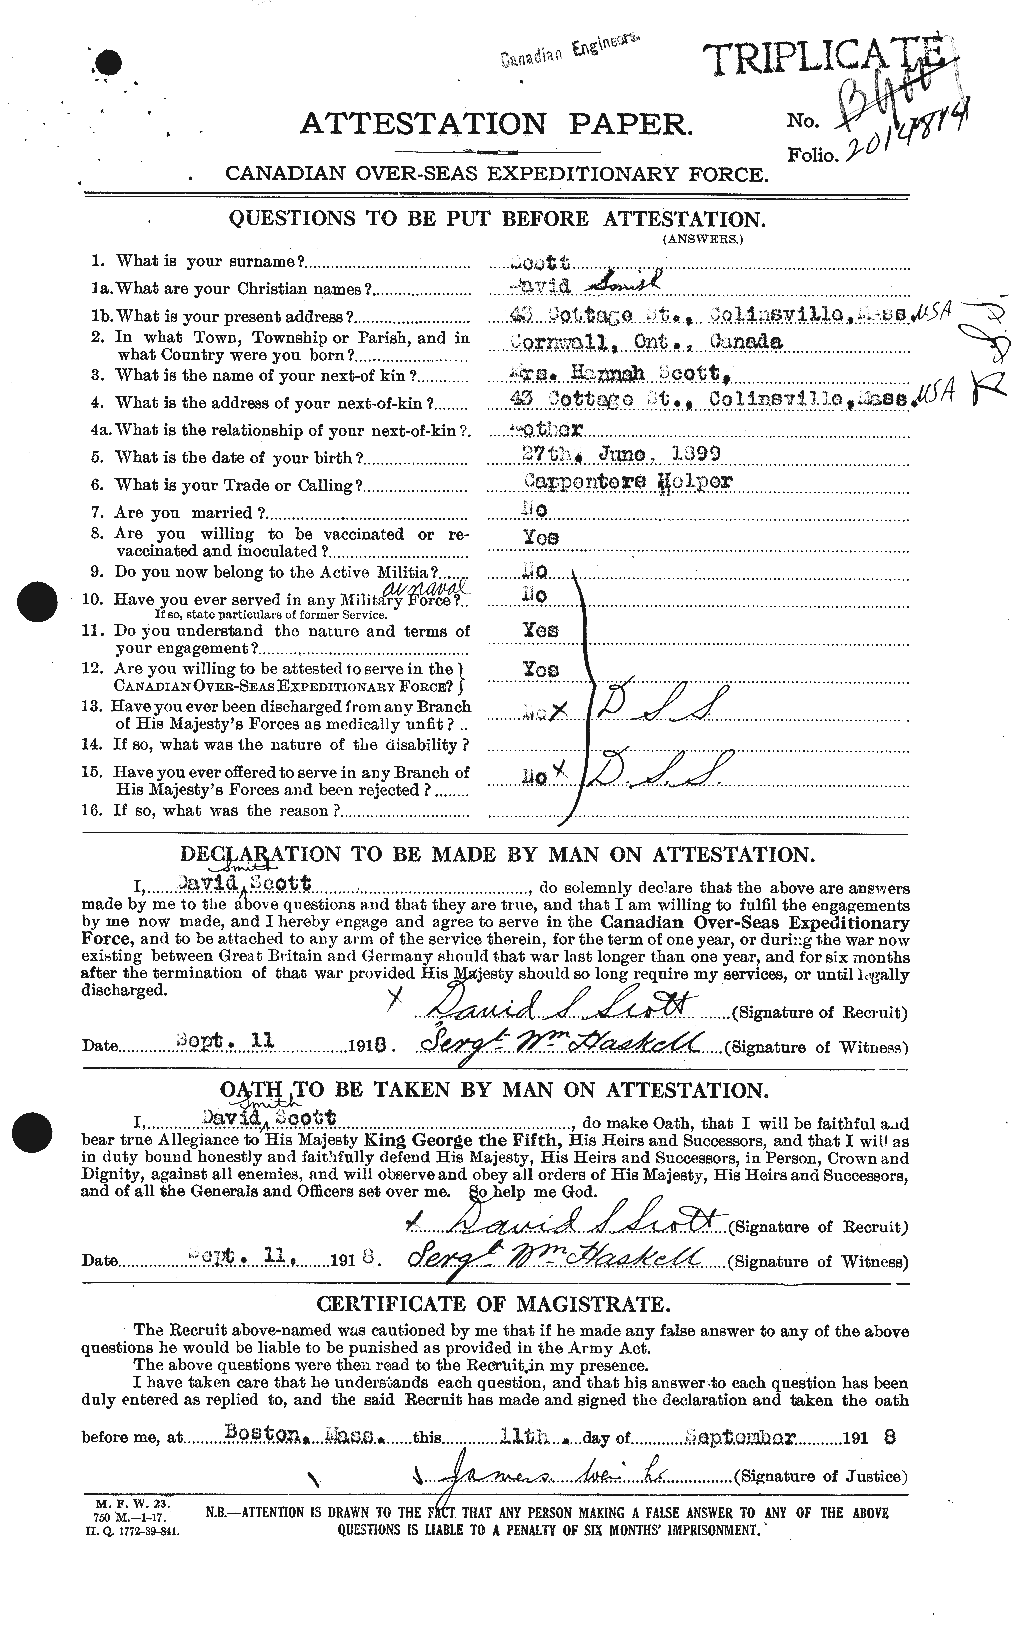 Personnel Records of the First World War - CEF 085370a